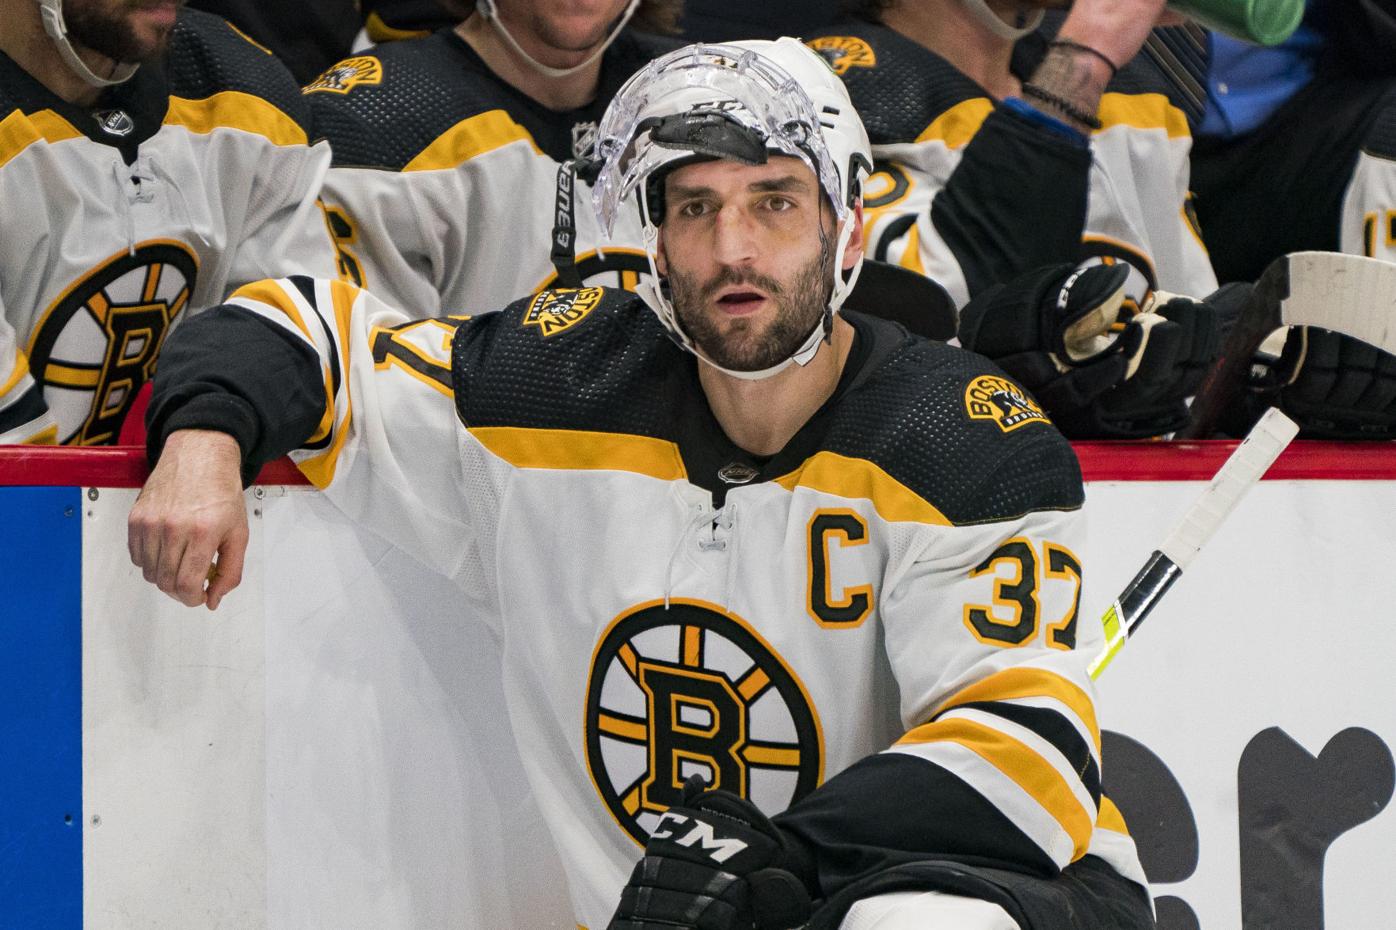 Recchi re-signs with Bruins